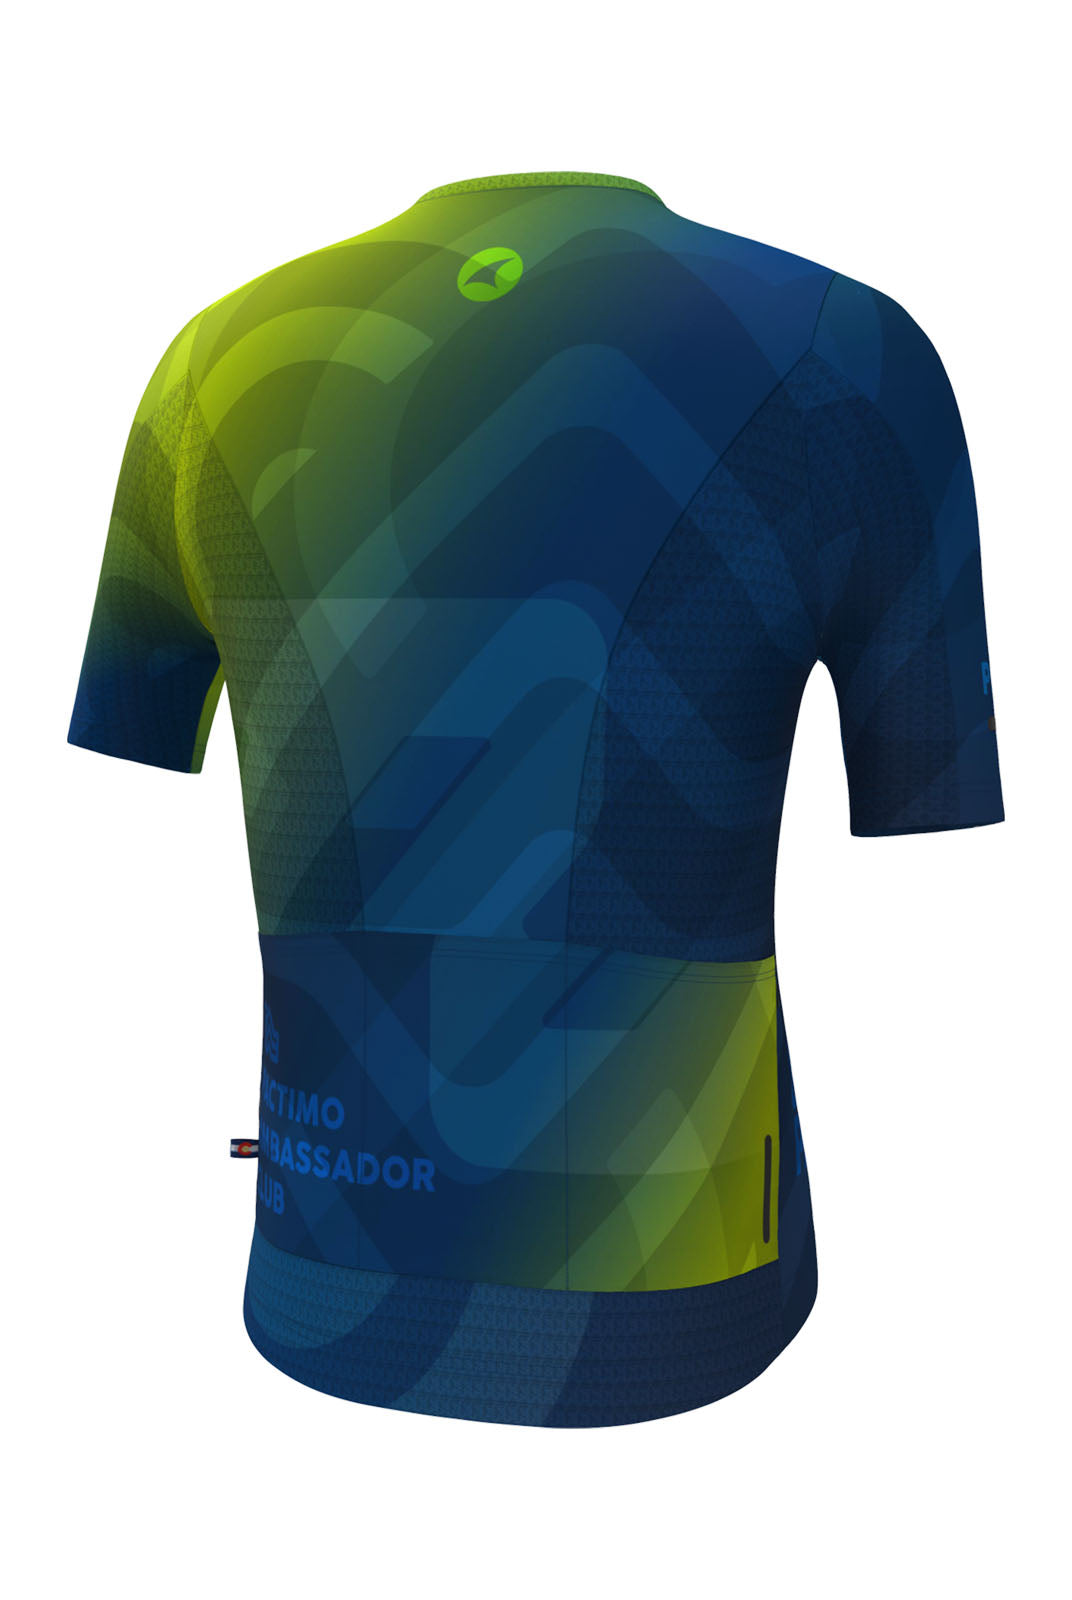 Men's PAC Summit Cycling Jersey - Cool Fade Back